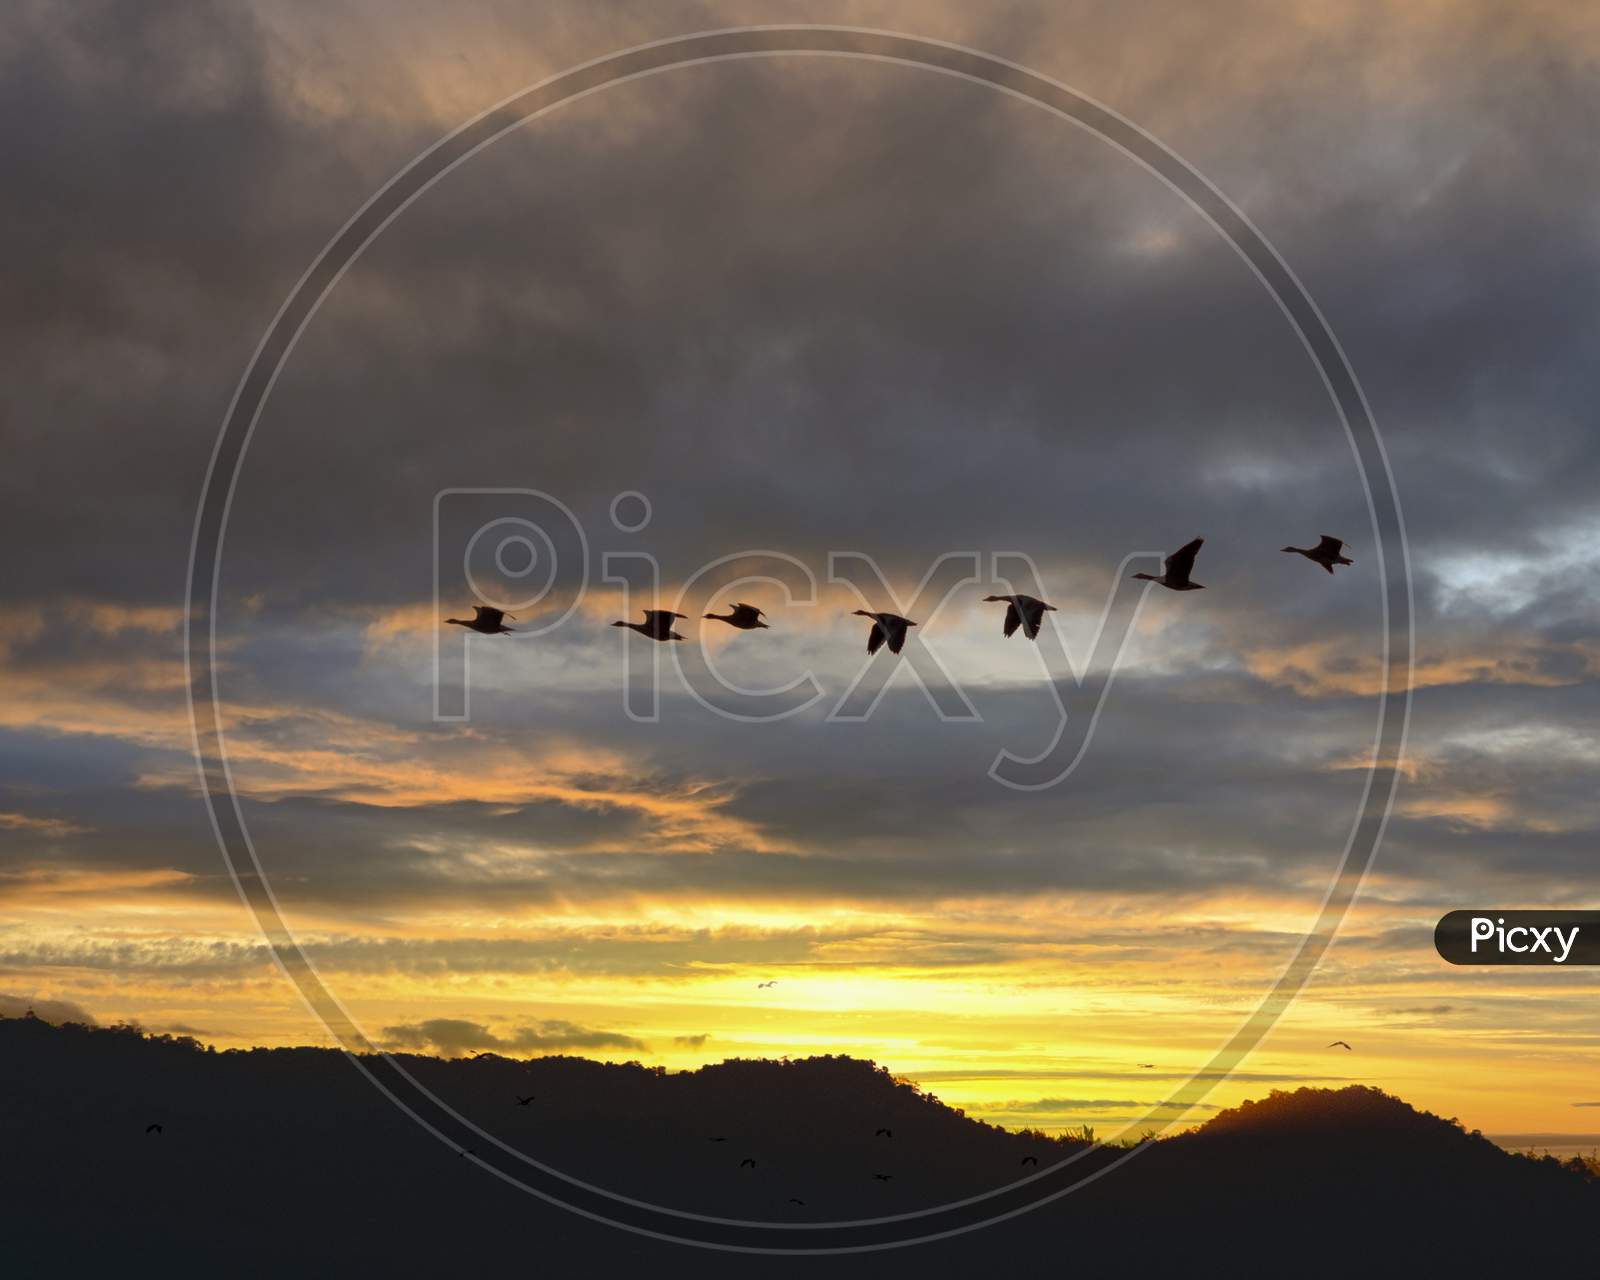 A gaggle of geese flying back home on a beautiful sunset.